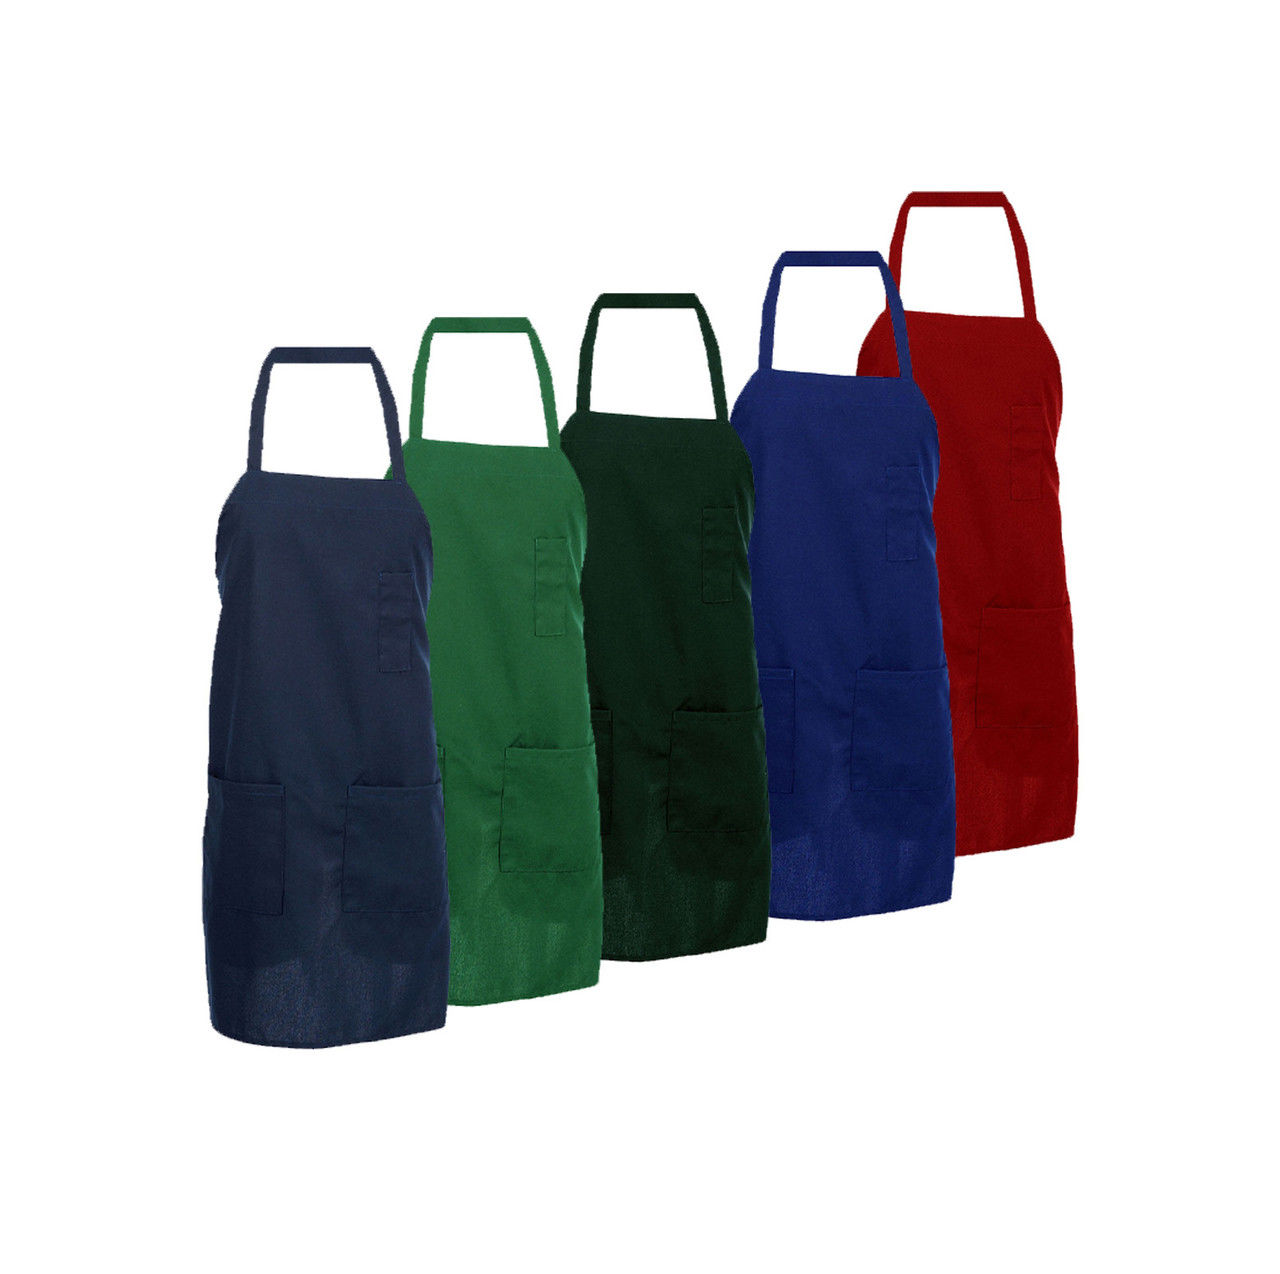 What fabric is used for the braid bib 3-Pocket Apron and what size is it?